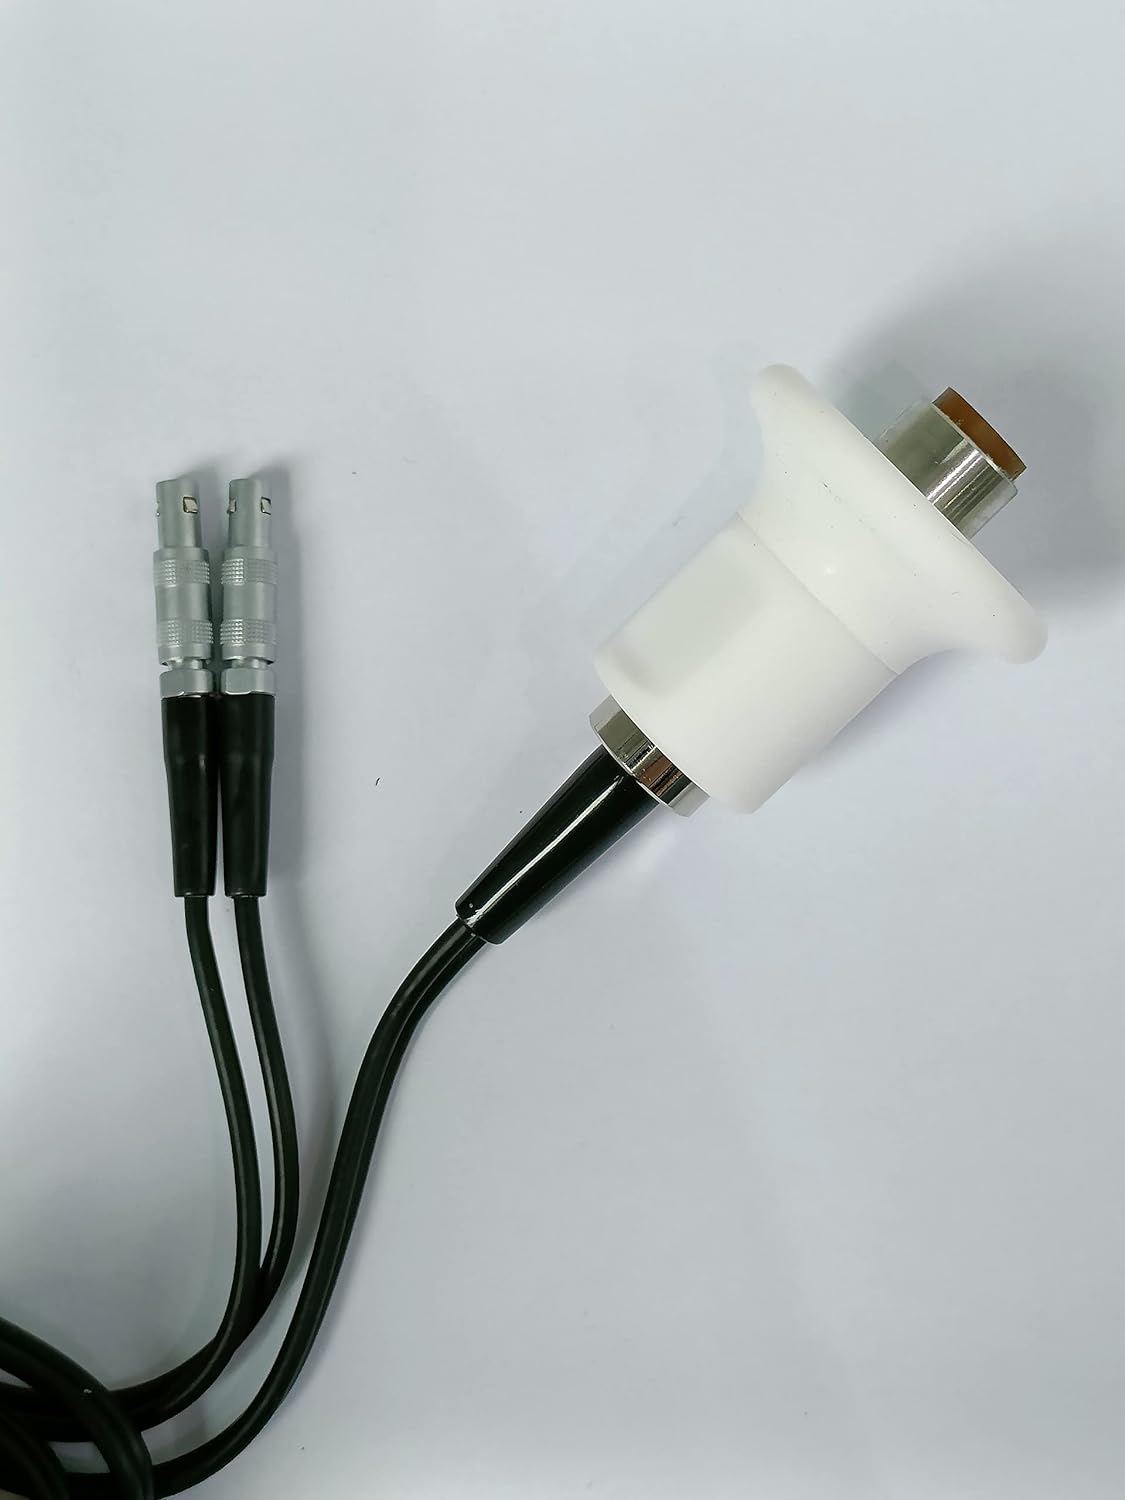 VTSYIQI Probe Transducer 5mhz 12mm High Temperature Probe for Ultrasonic Thickness Gauge